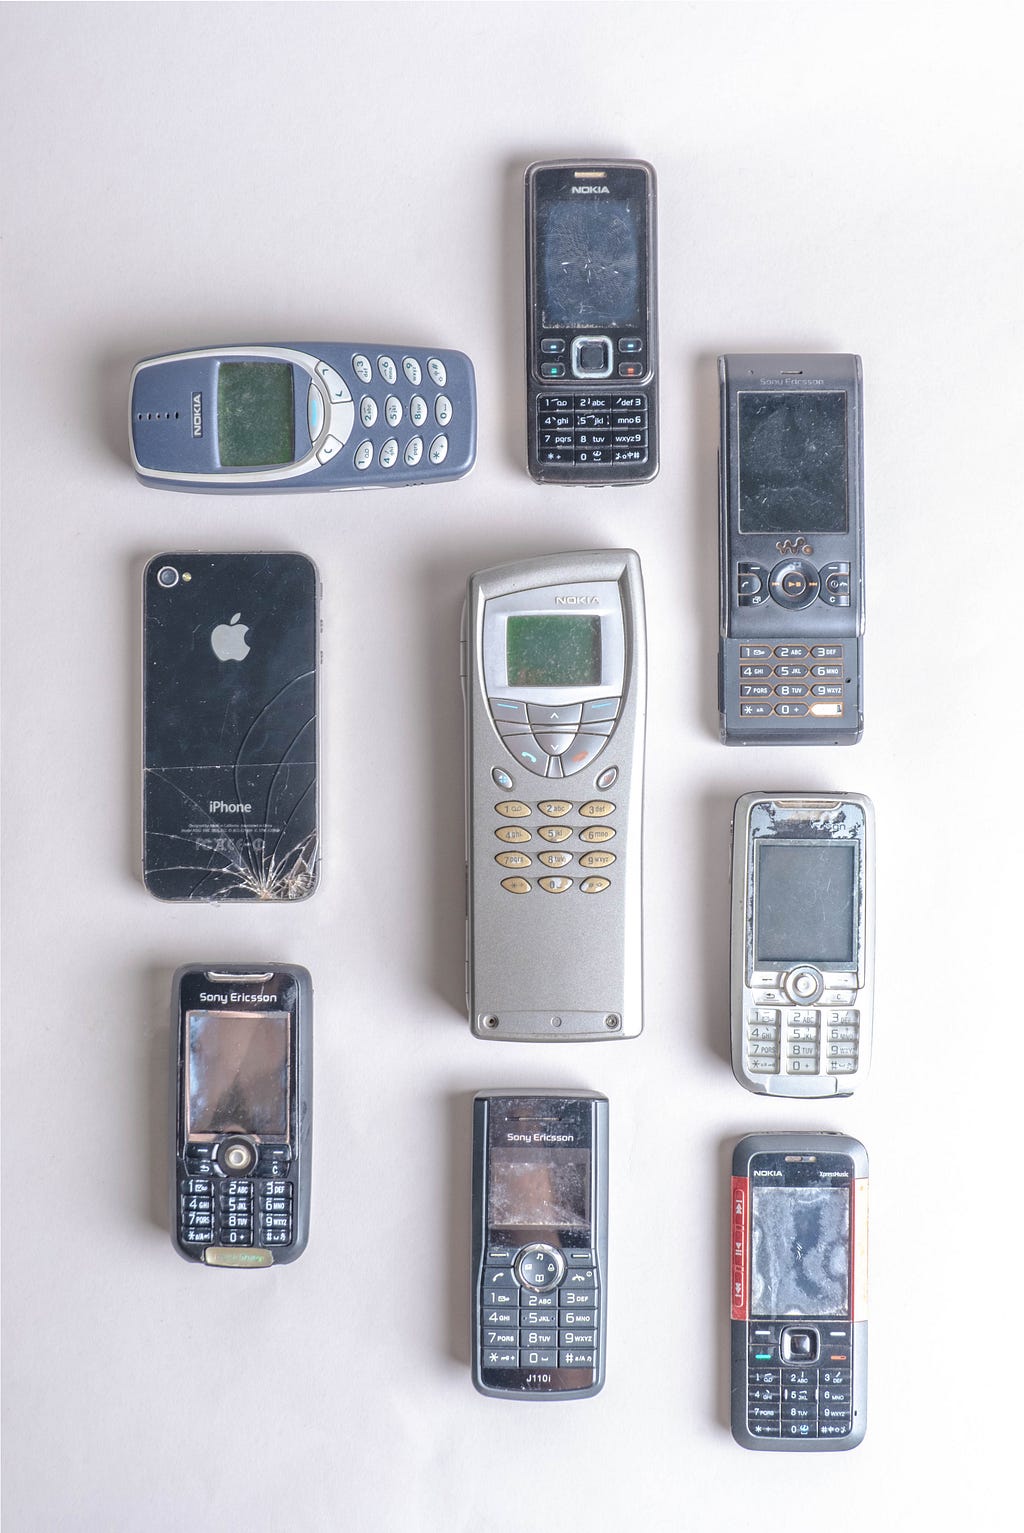 Old cellular phones from Nokia, Apple, and Sony Ericsson. Outdated or nostalgic?